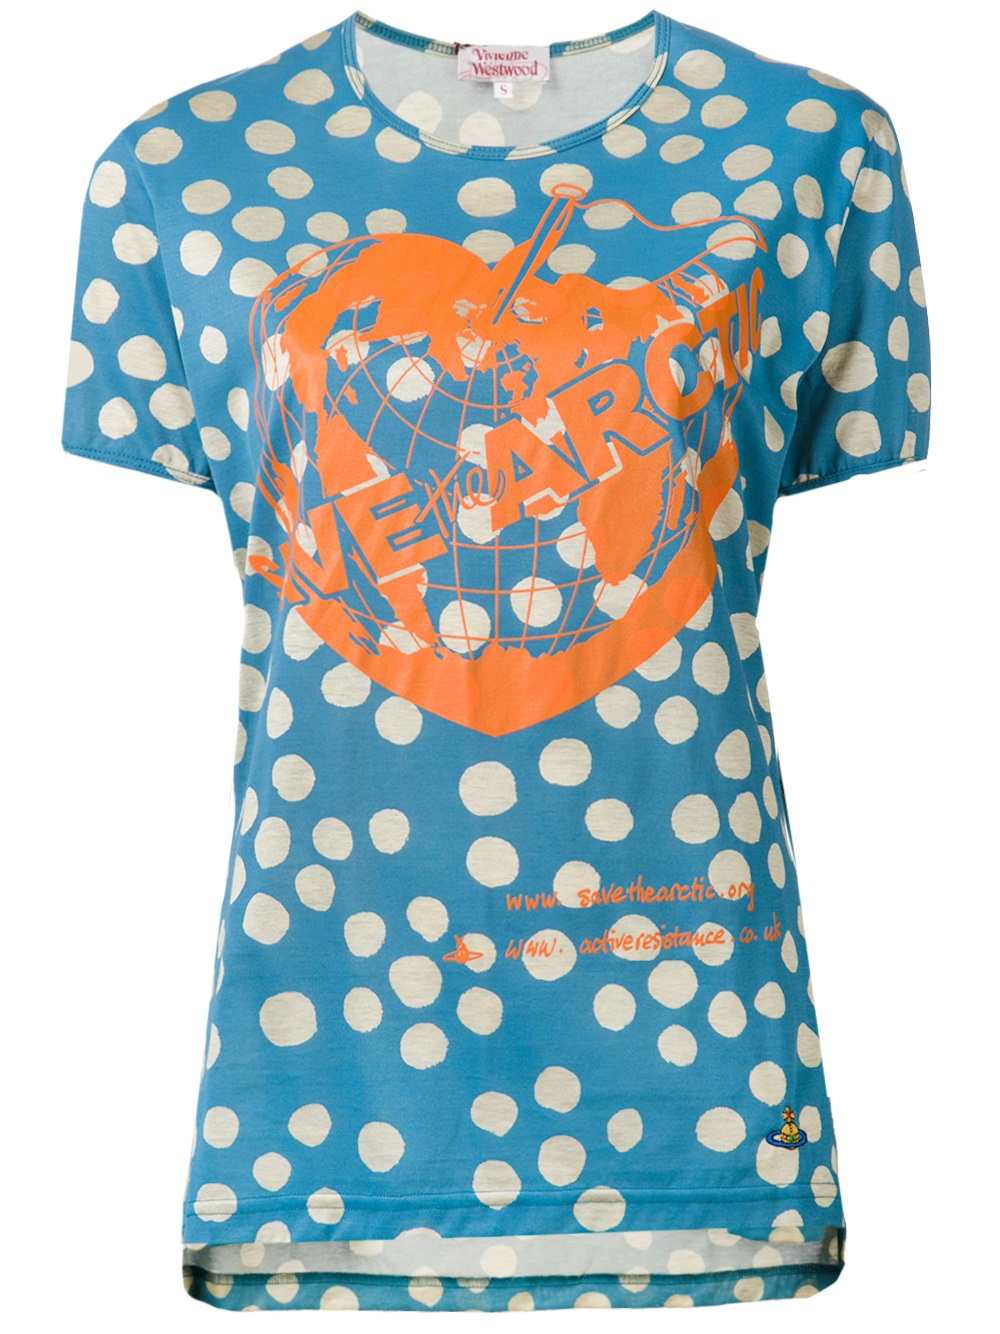 Lyst - Vivienne Westwood Save The Arctic Tshirt in Blue